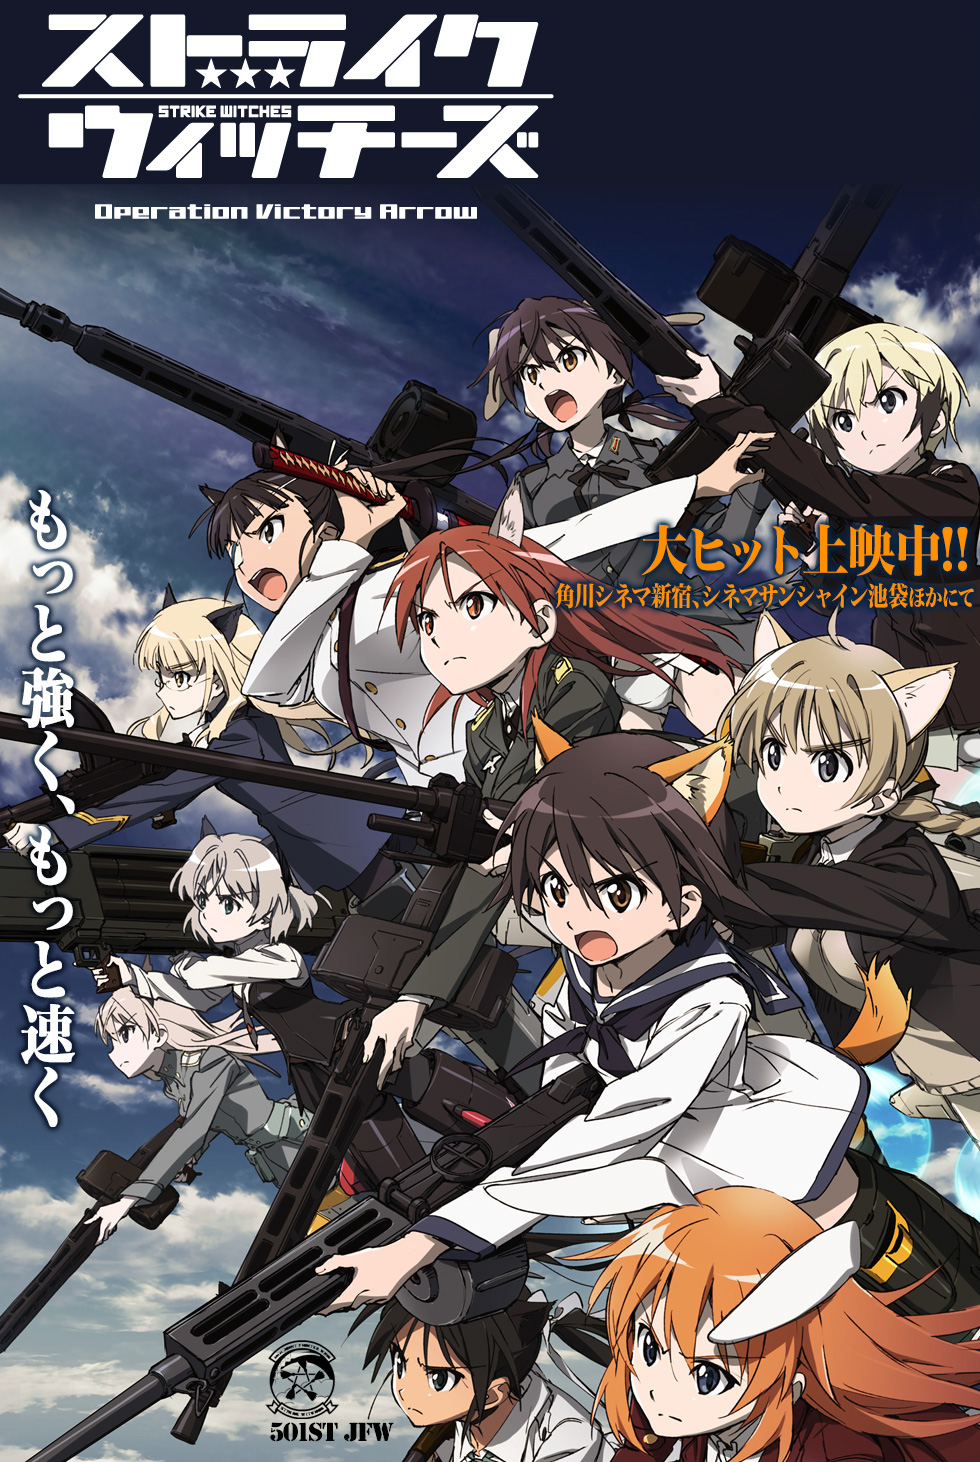 Strike-Witches-Operation-Victory-Arrow-Vol-Anime-Visual